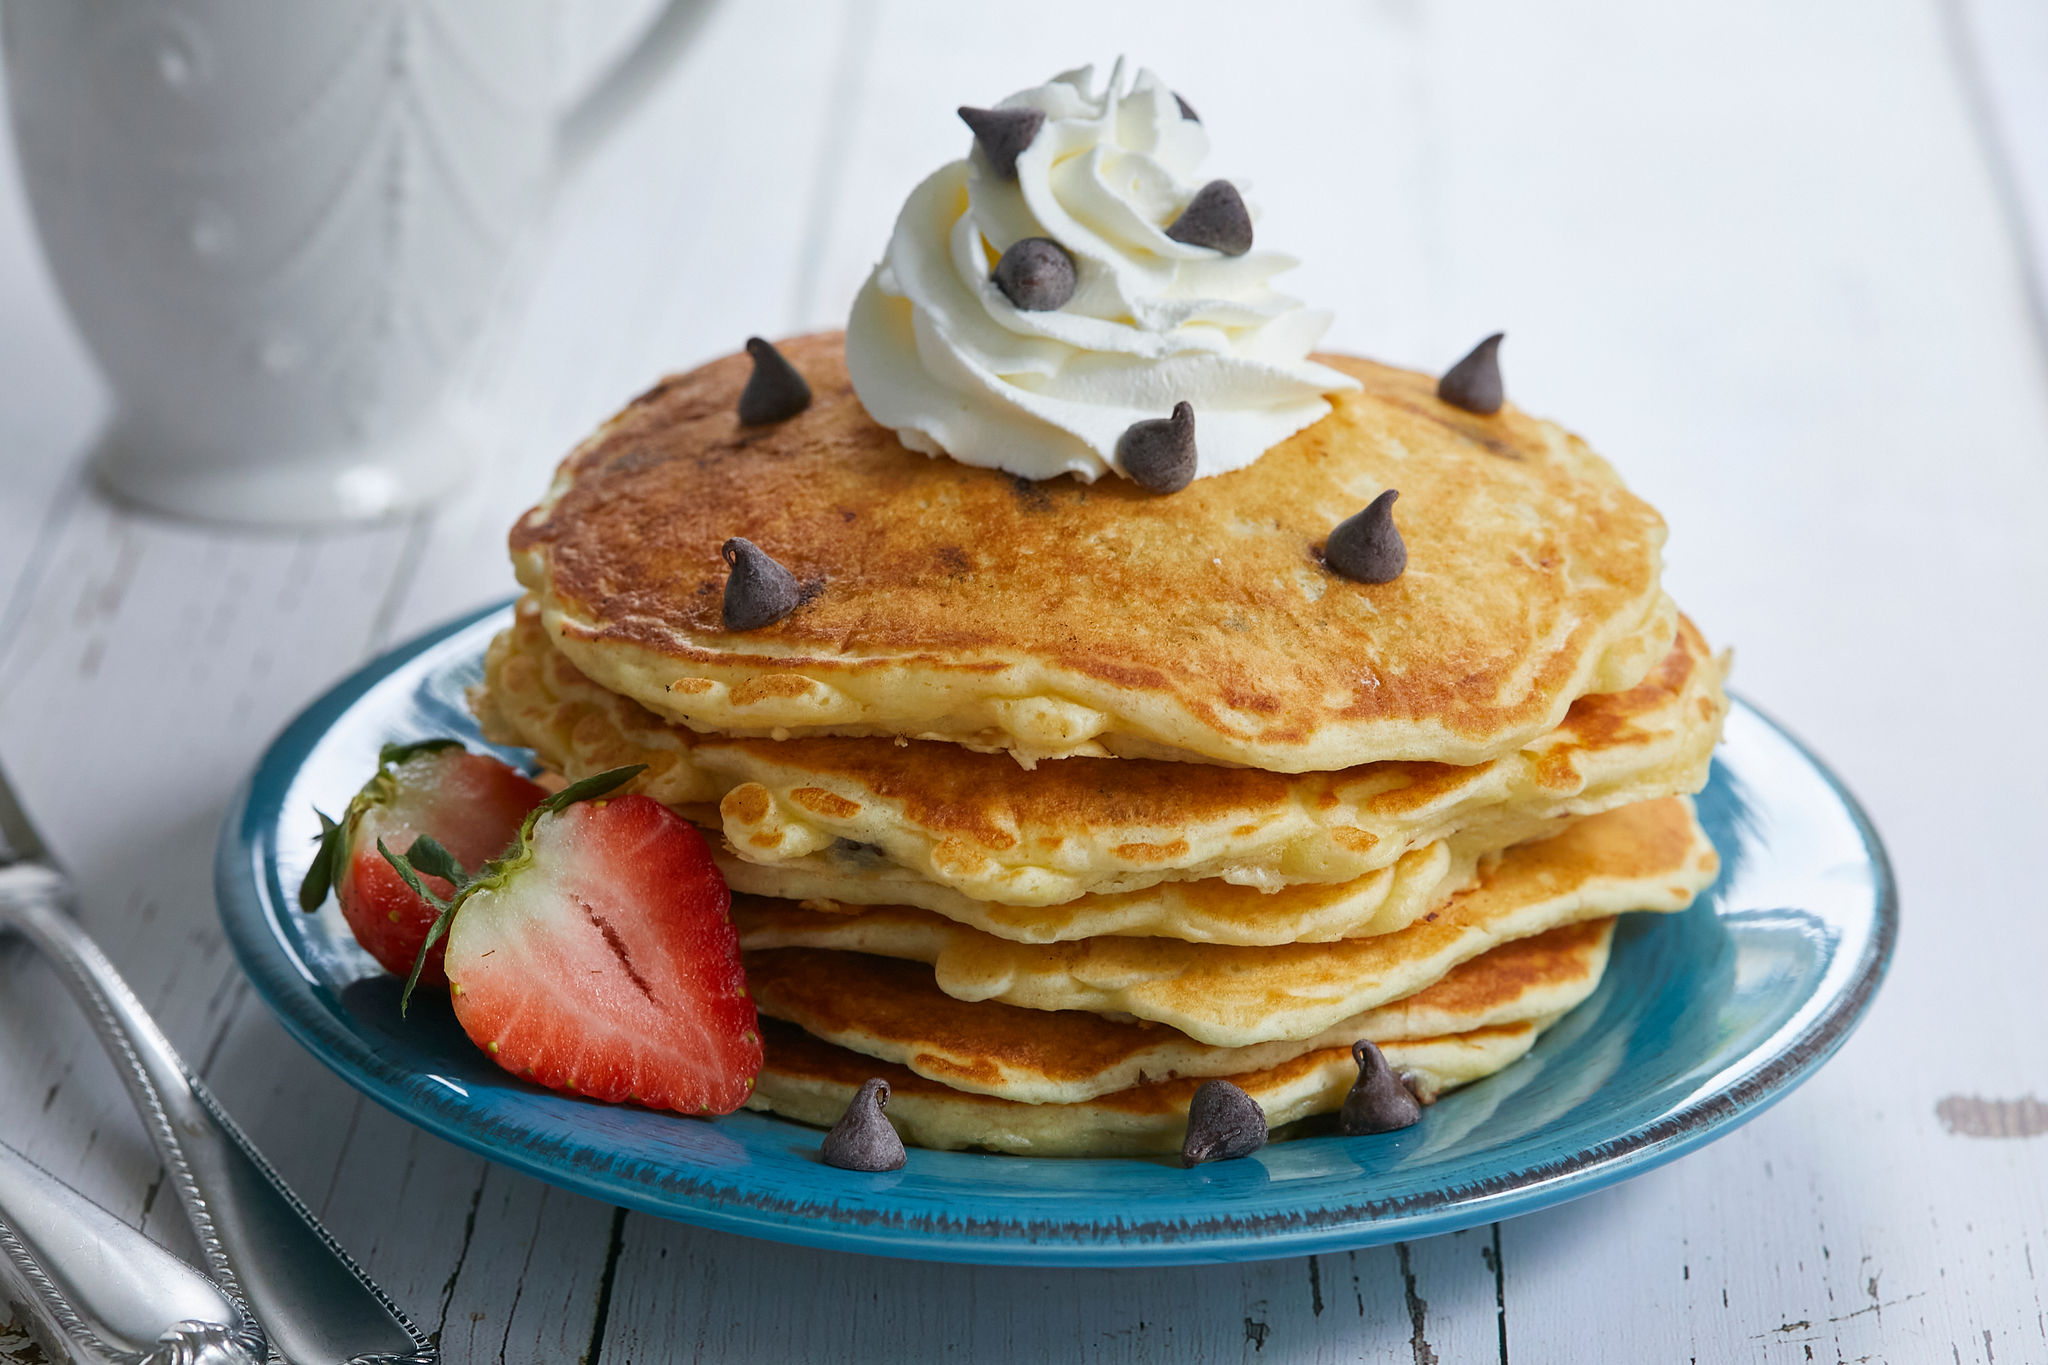 A stack of my Perfectly Sweet Chocolate Chip Pancake recipe, with chocolate chips, whipped cream, and strawberries on a blue plate.